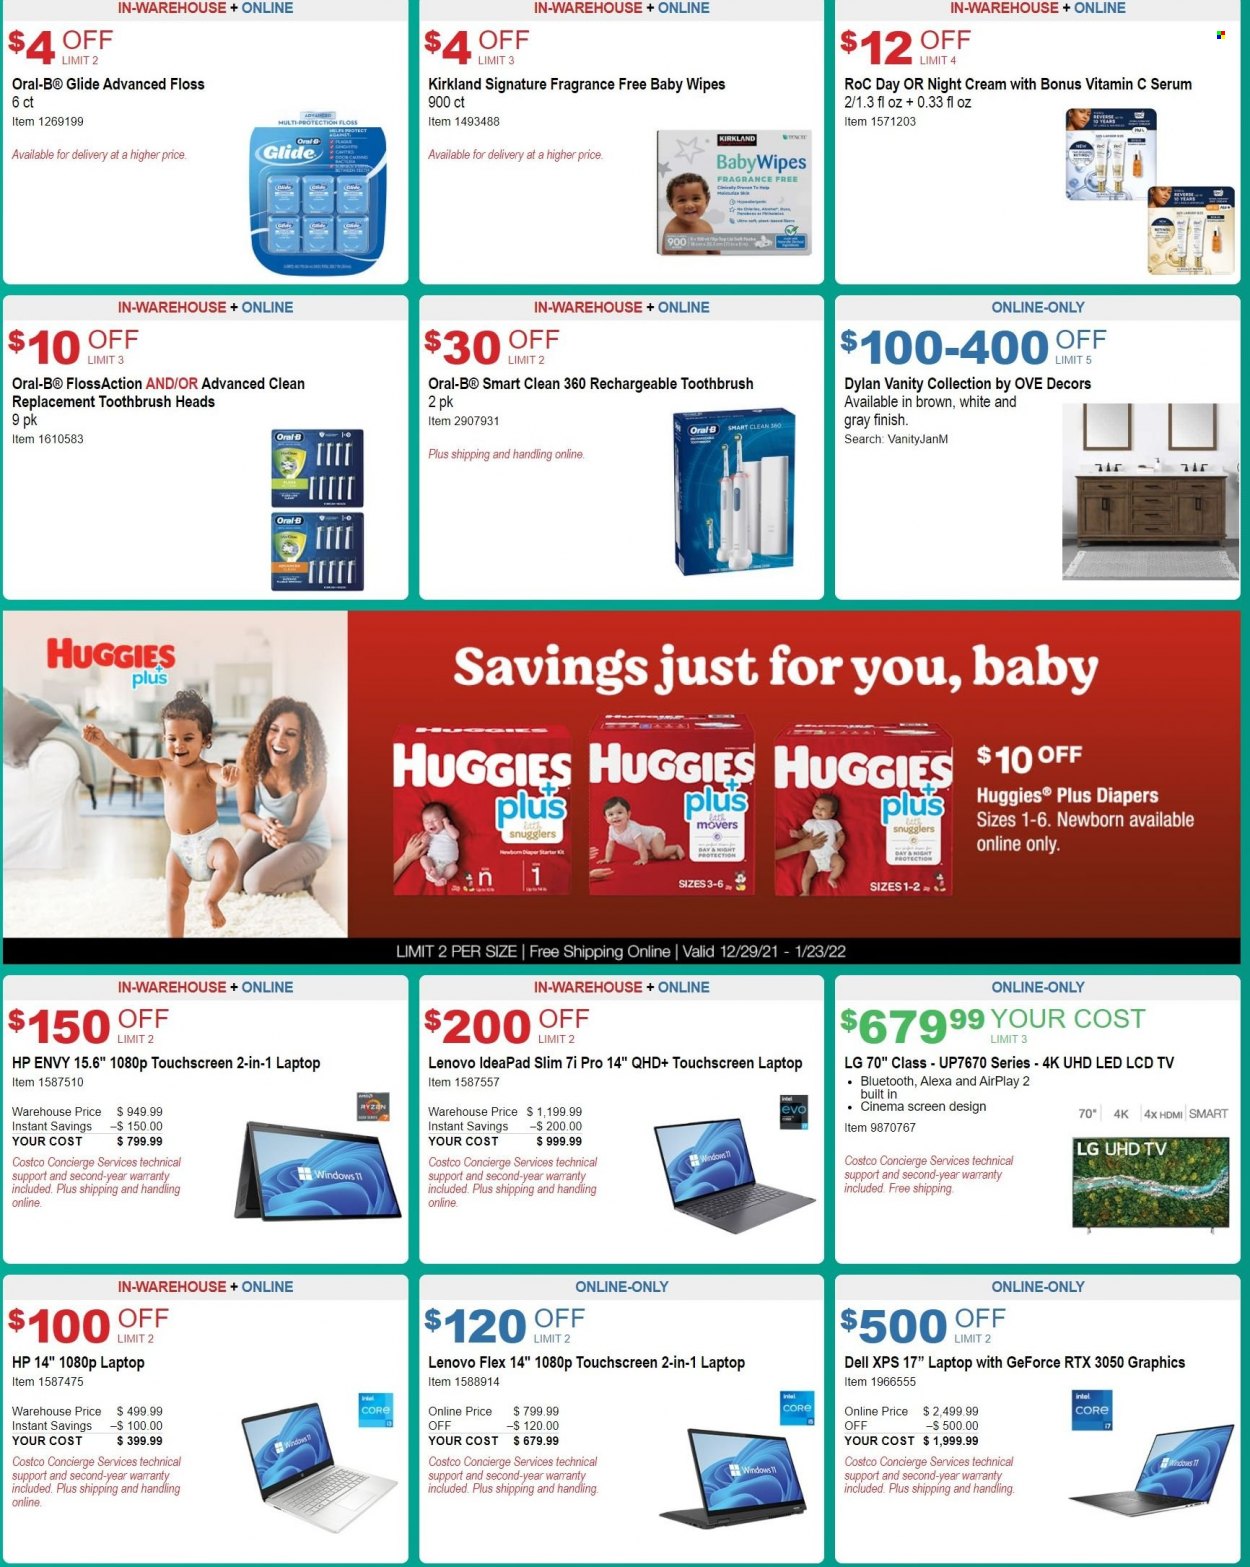 thumbnail - Costco Flyer - 12/29/2021 - 01/23/2022 - Sales products - vanity, Dell, LG, Intel, Lenovo, Hewlett Packard, wipes, Huggies, baby wipes, nappies, toothbrush, Oral-B, serum, night cream, laptop, hp envy, touchscreen laptop, GeForce, Ryzen, UHD TV, TV, Plus Plus, window, starter. Page 2.